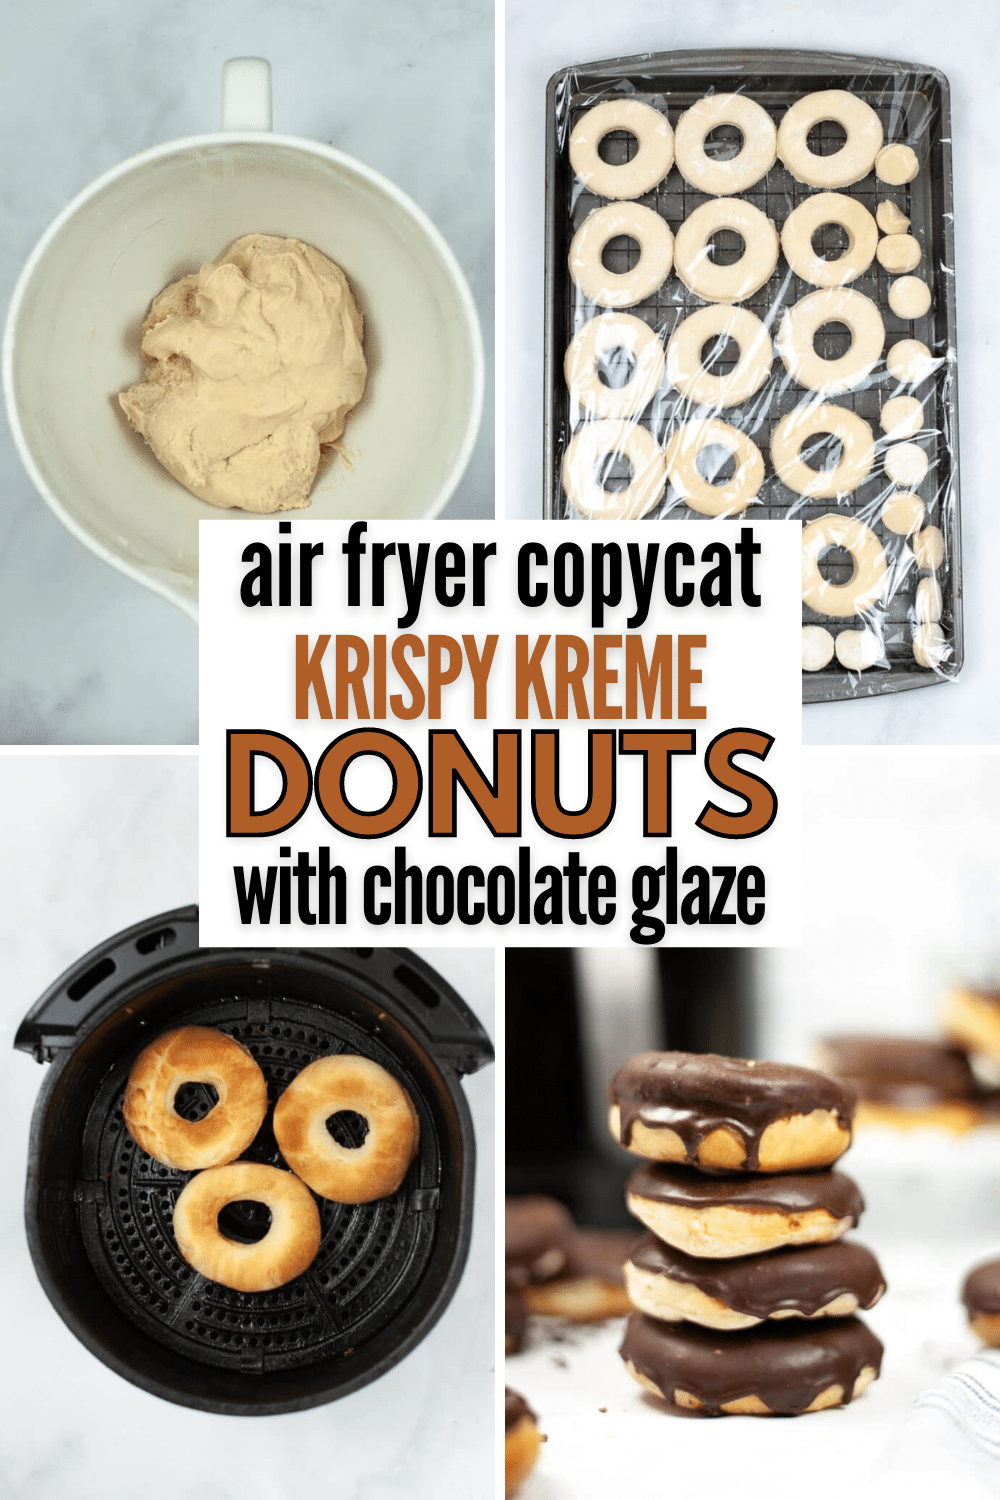 These Air Fryer Copycat Krispy Kreme Chocolate Glazed Donuts are literally the best. One bite and you'll never be buying donuts again. #airfryer #krispykreme #donuts #chocolateglazeddonuts #recipe via @wondermomwannab